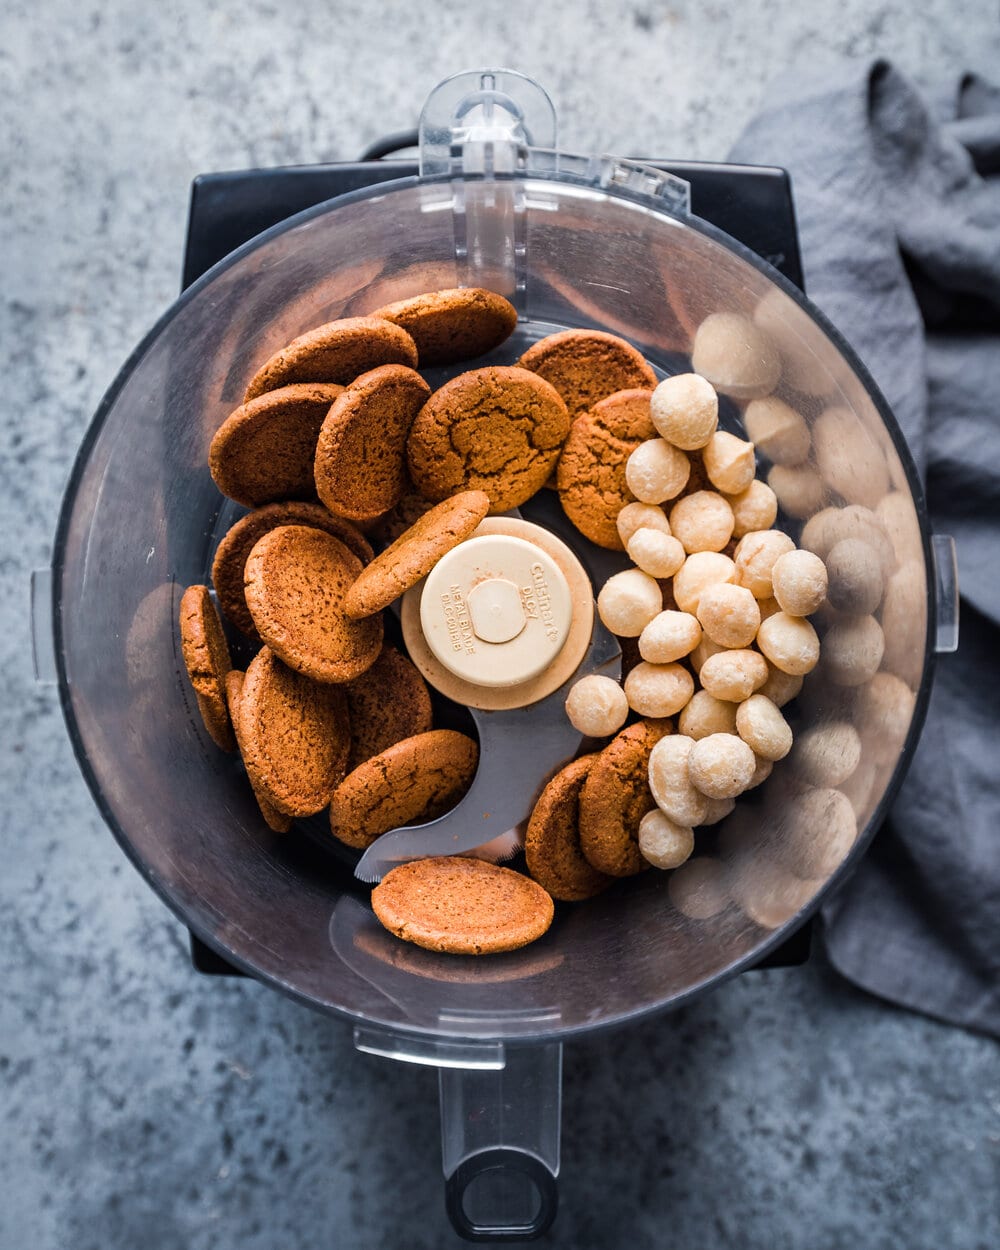 gingersnap cookies and macadamia nuts in food processor